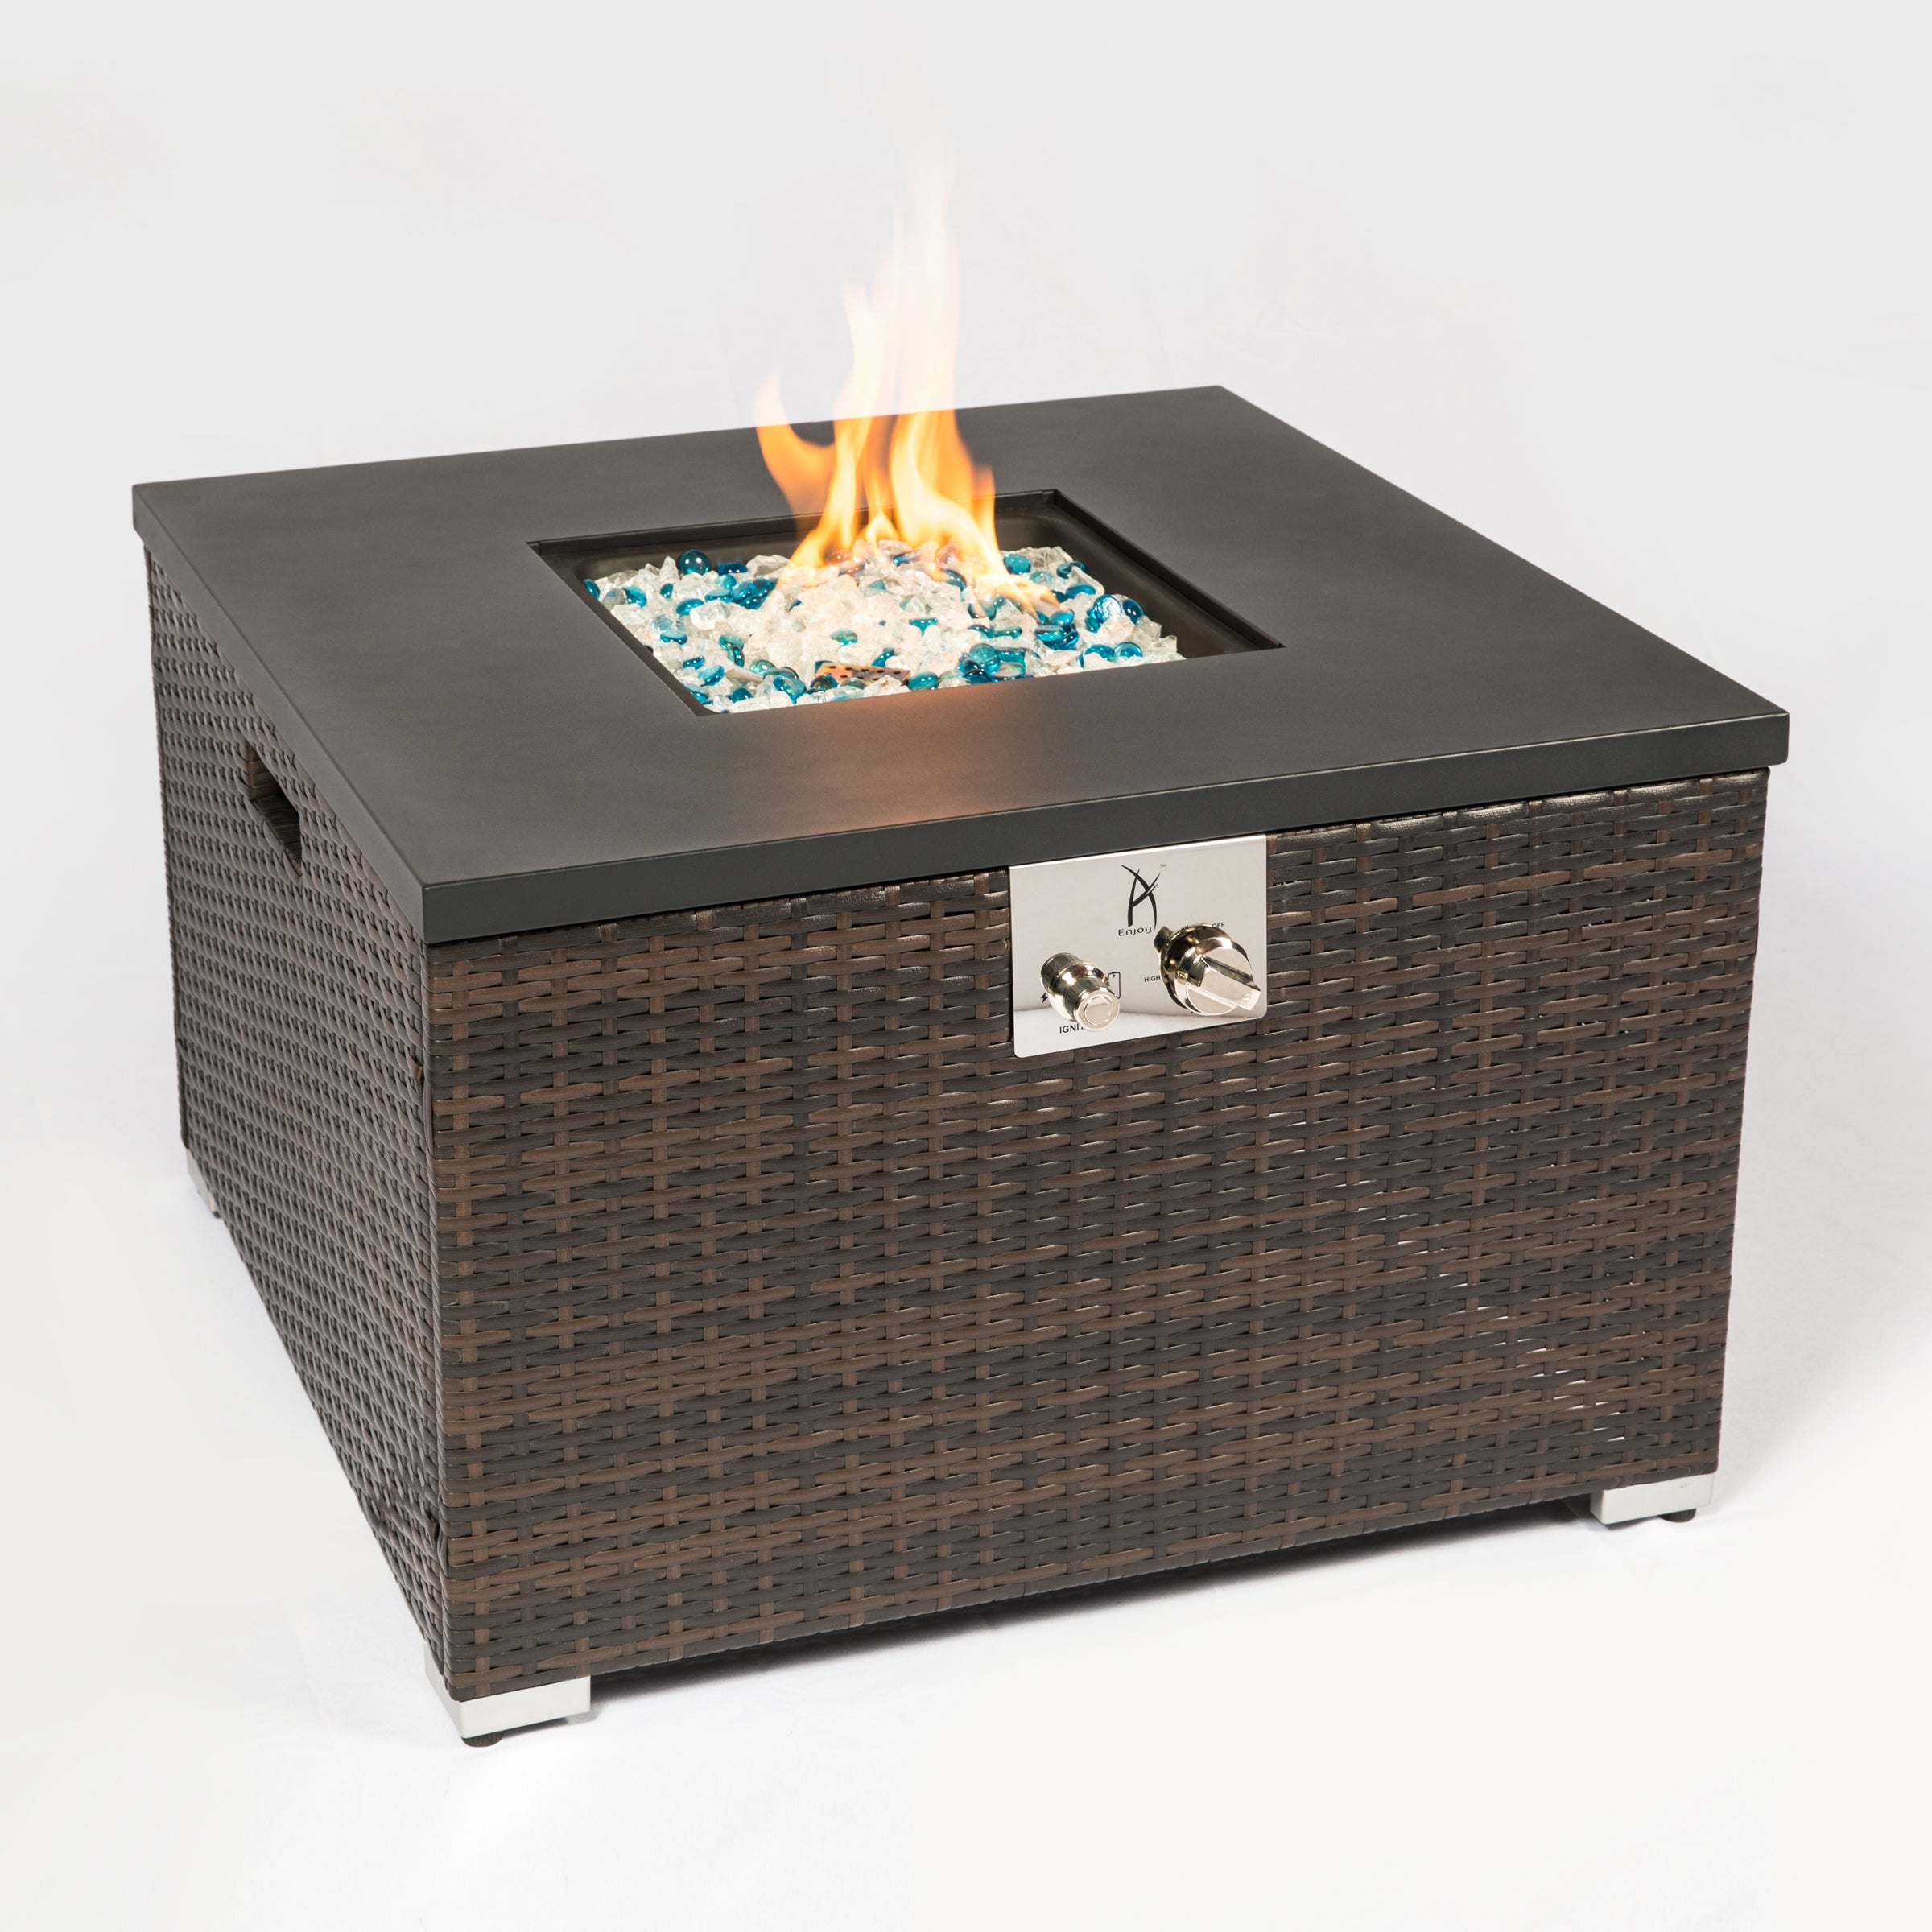 32" Outdoor Propane Gas Fire Pit Table with Tank Cover